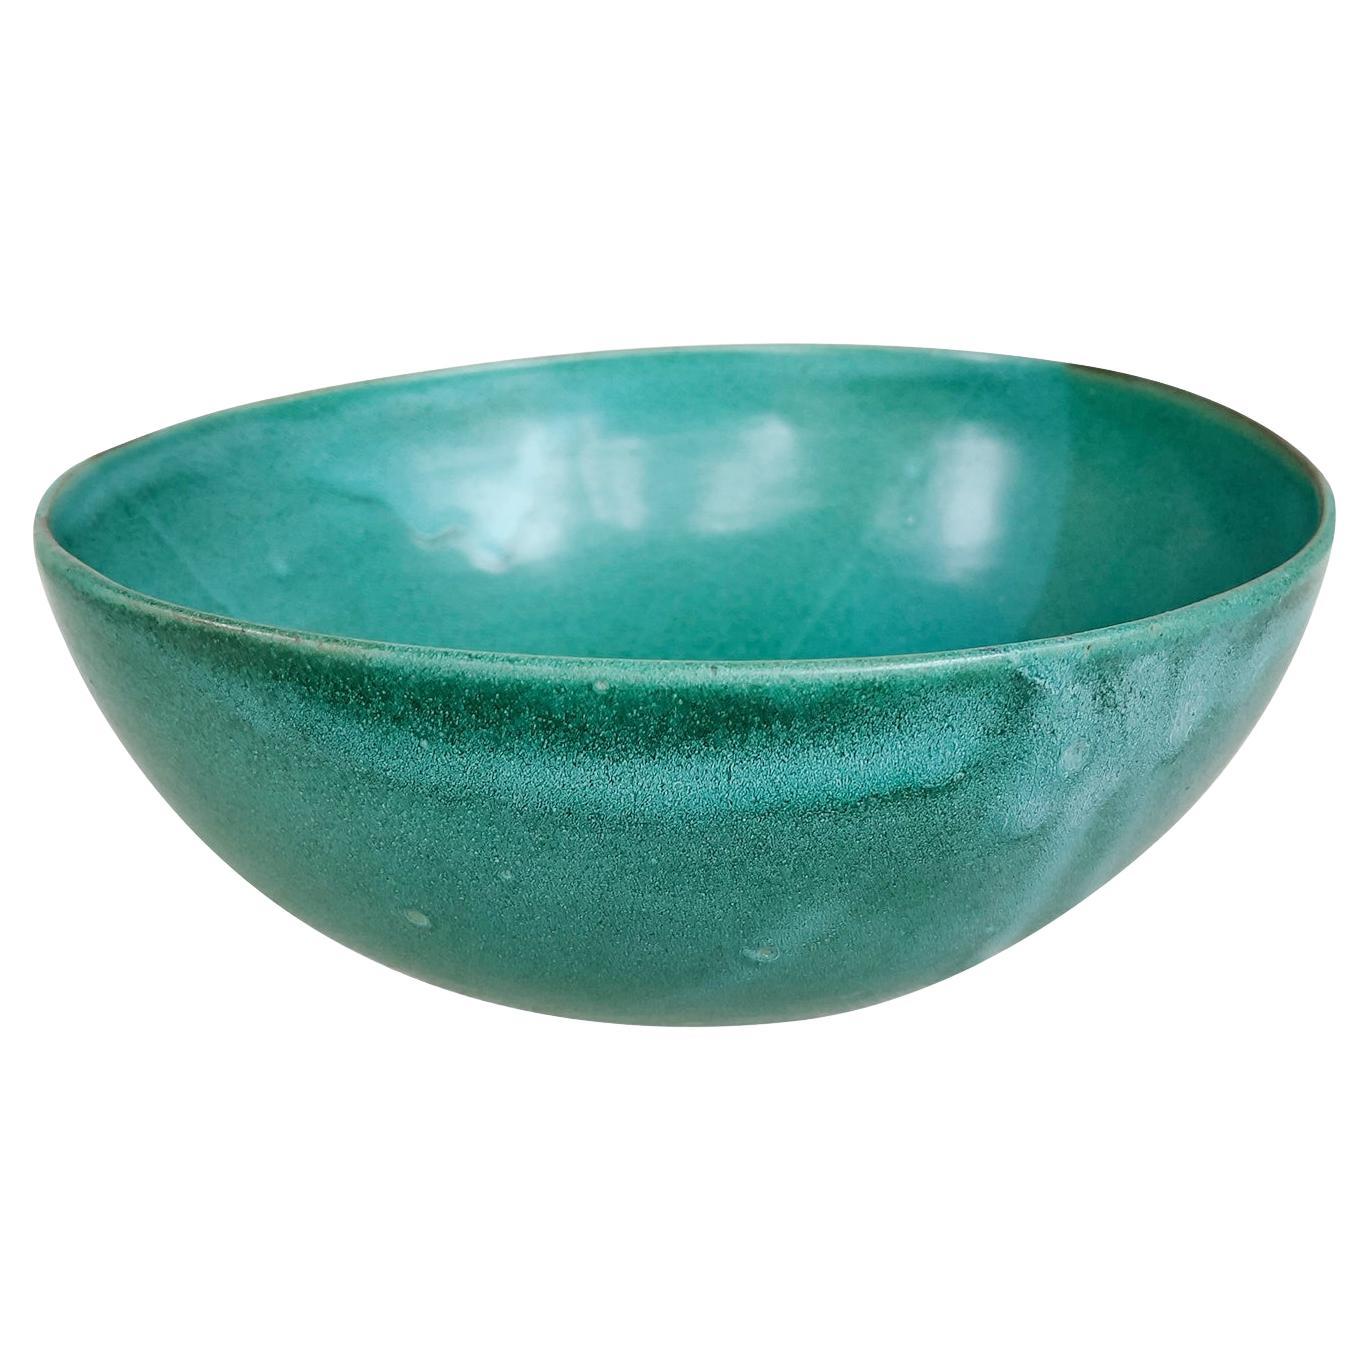 Thom Lussier Ceramic Bowl #29, from the Oxidized Copper Collection For Sale